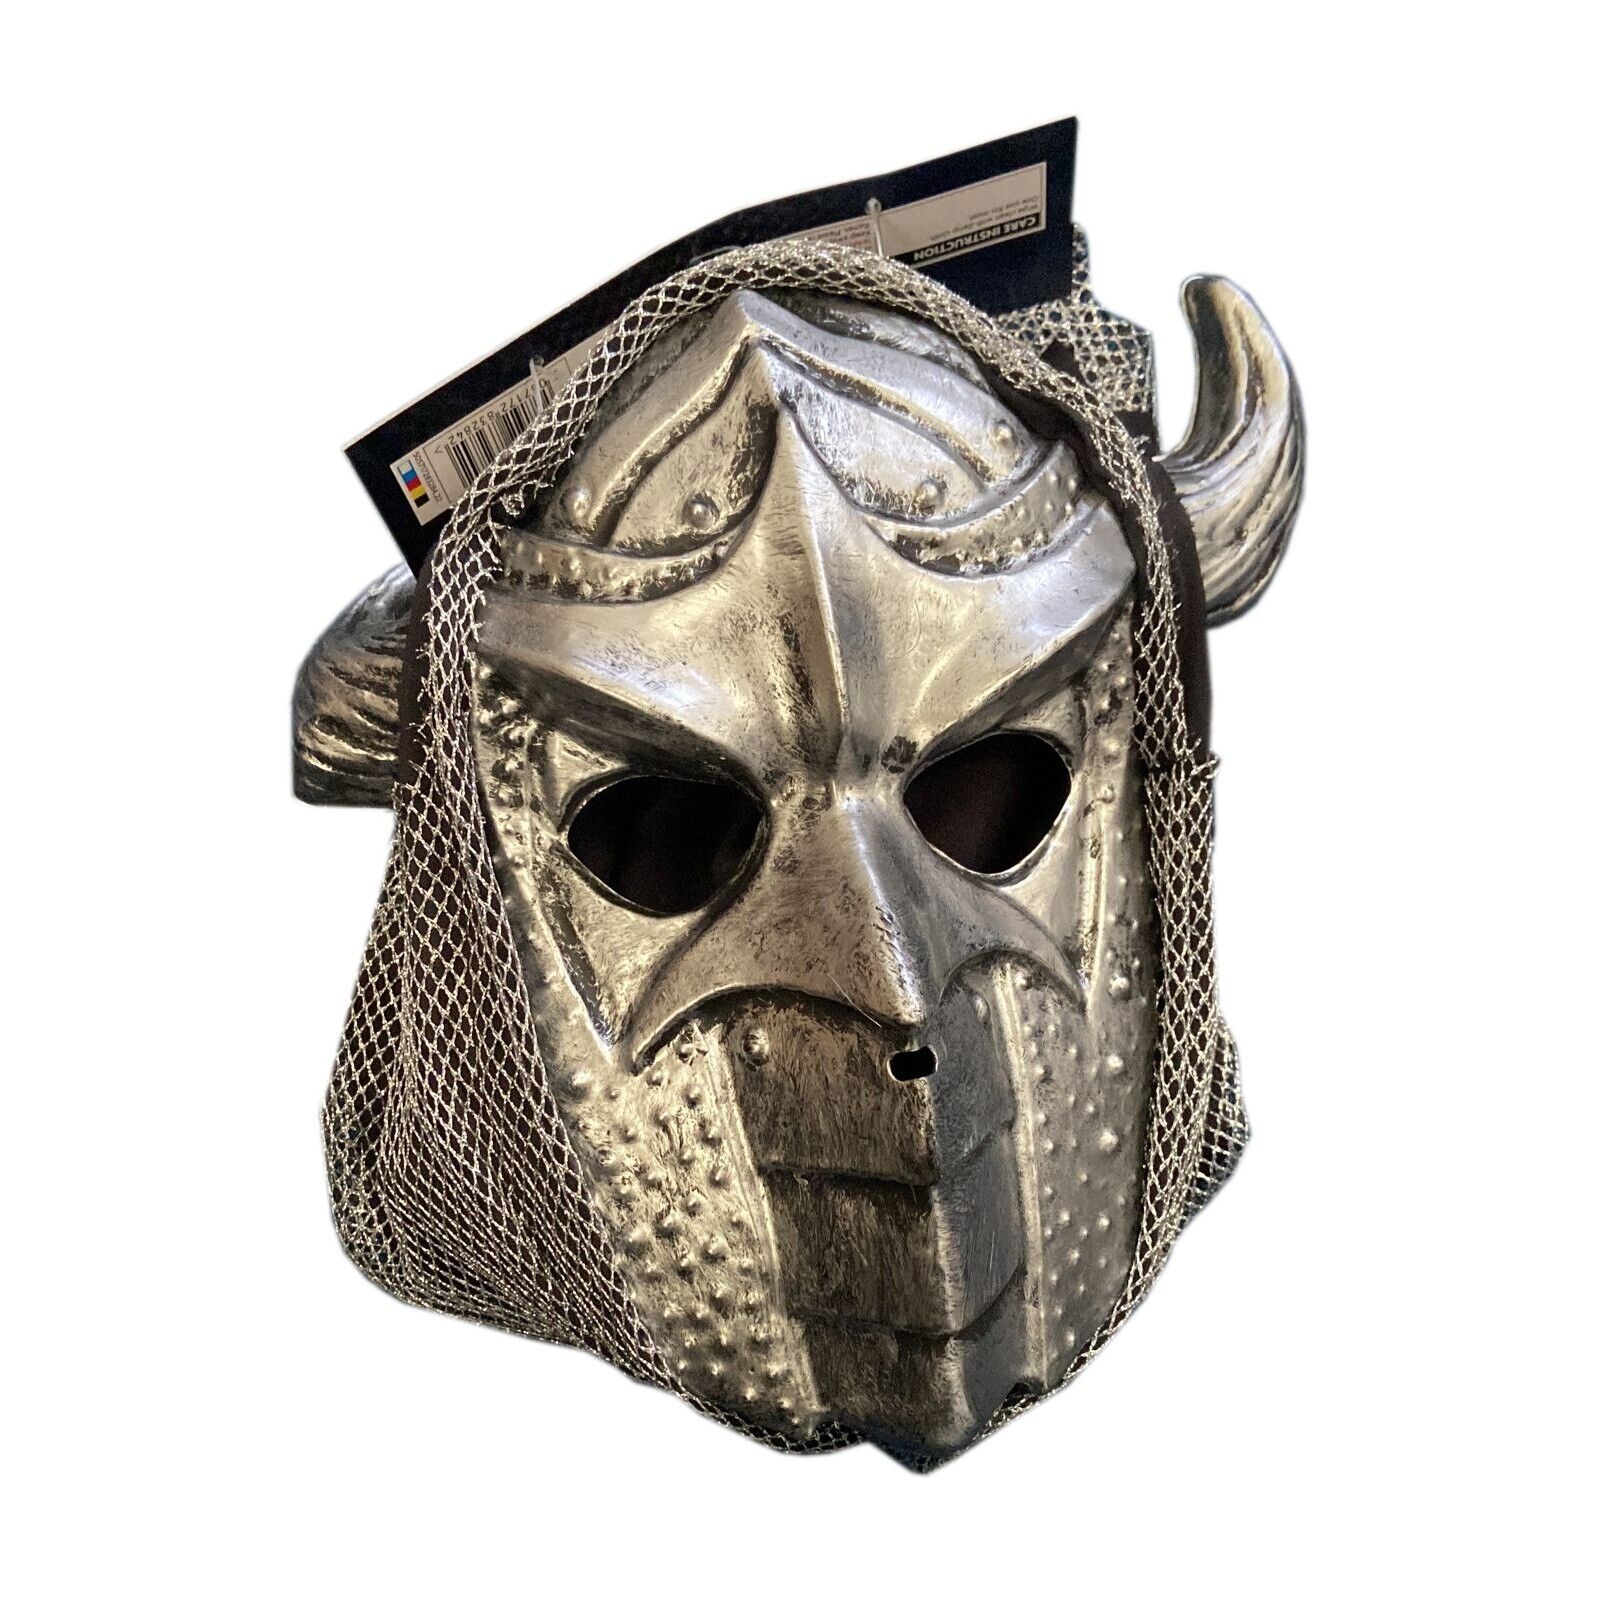 George Happy Halloween Knight Hooded Mask RRP £3.99 CLEARANCE XL £2.99